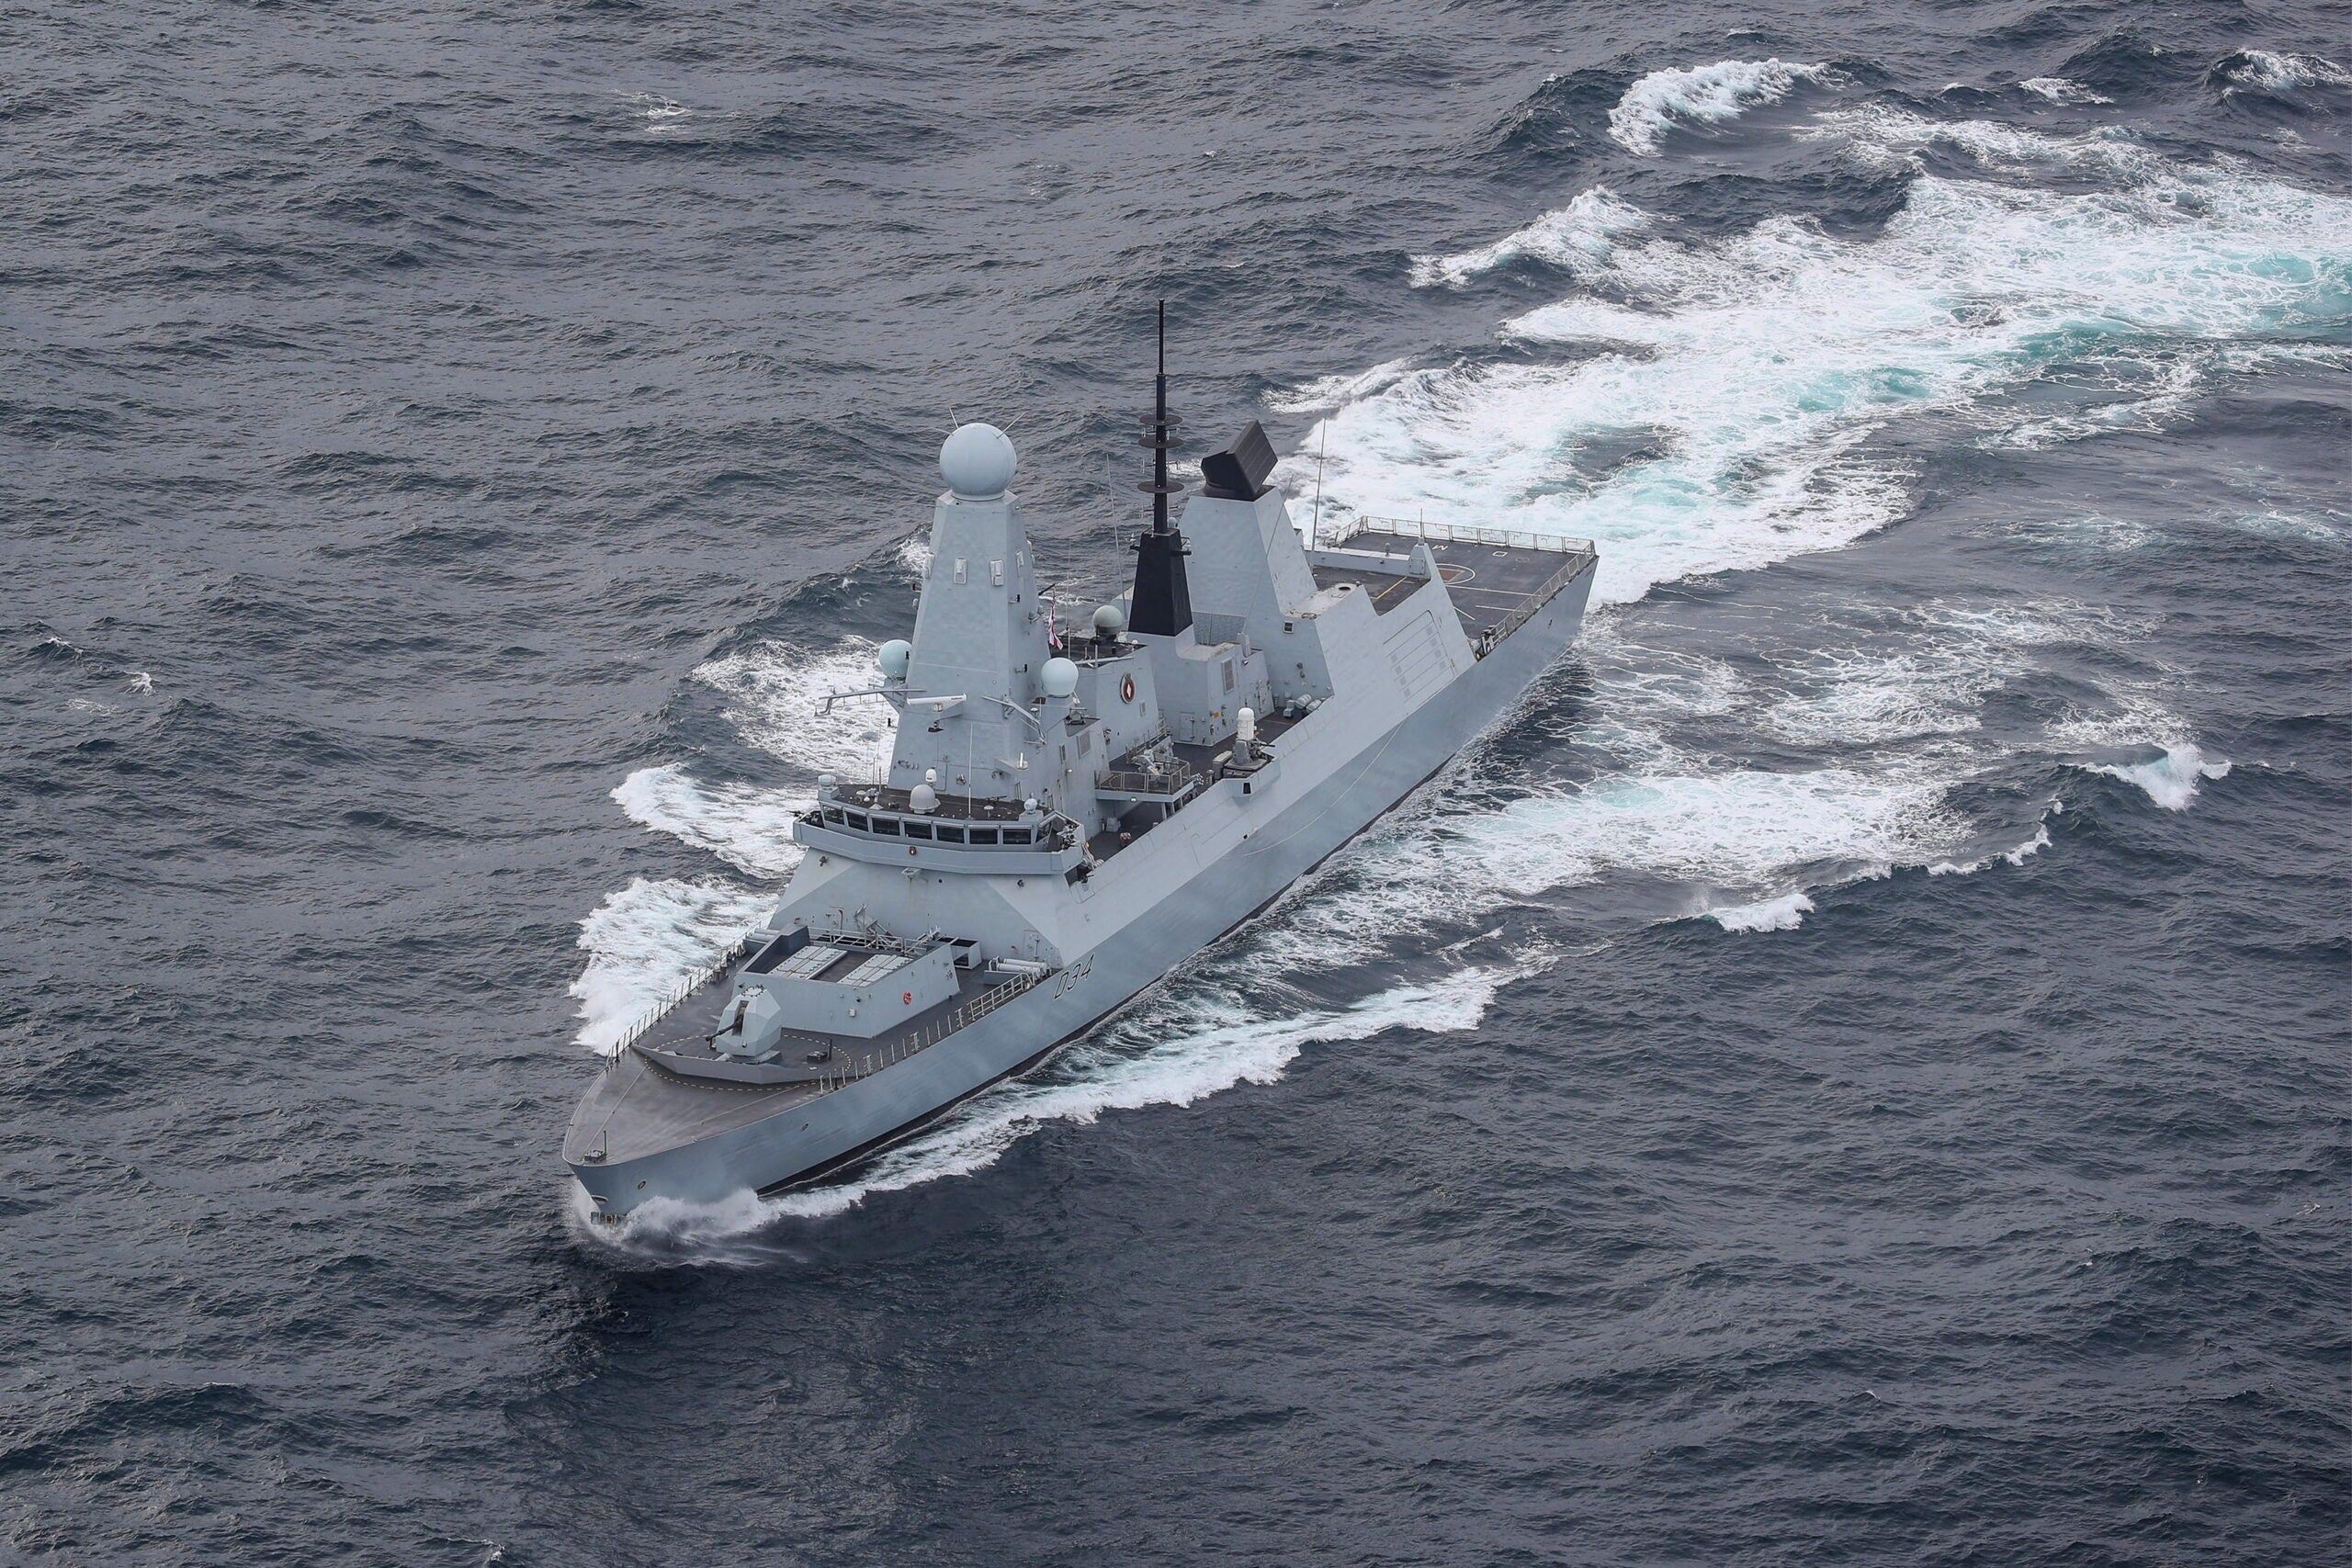 Image of HMS Diamond, seen here off the coast of Scotland today (04/10/2020).

The full UK Carrier Strike Group assembled for the first time during Group Exercise 2020 on 4th October. Aircraft carrier HMS Queen Elizabeth leads a flotilla of destroyers and frigates from the UK, US and the Netherlands, together with two Royal Fleet Auxiliaries. It is the most powerful task force assembled by any European Navy in almost 20 years.